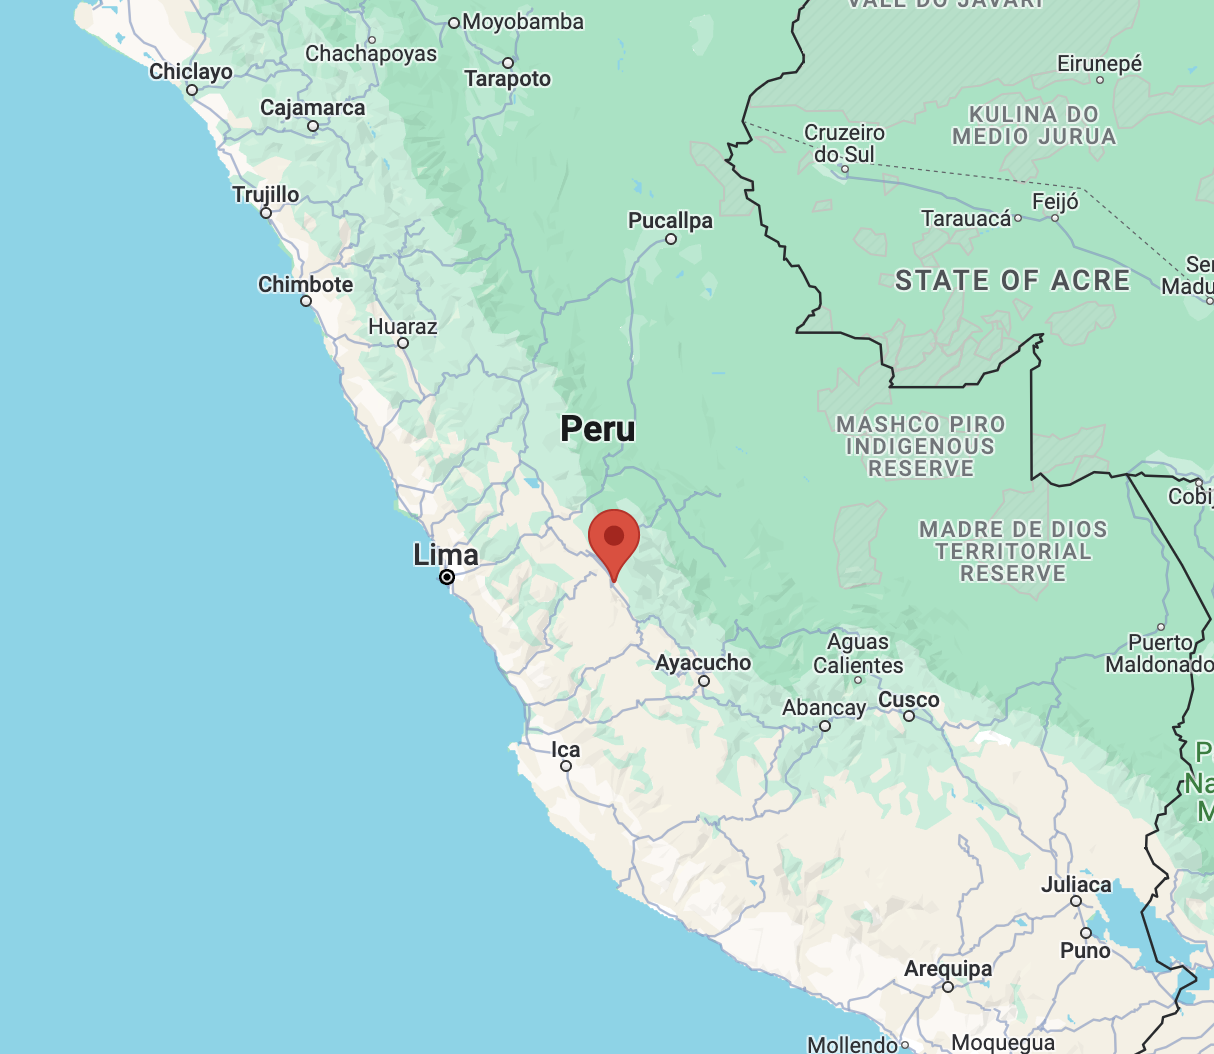 A map showing the location of Huancayo in relation to the country of Peru. The city lies east of Lima in the south central part of Peru.